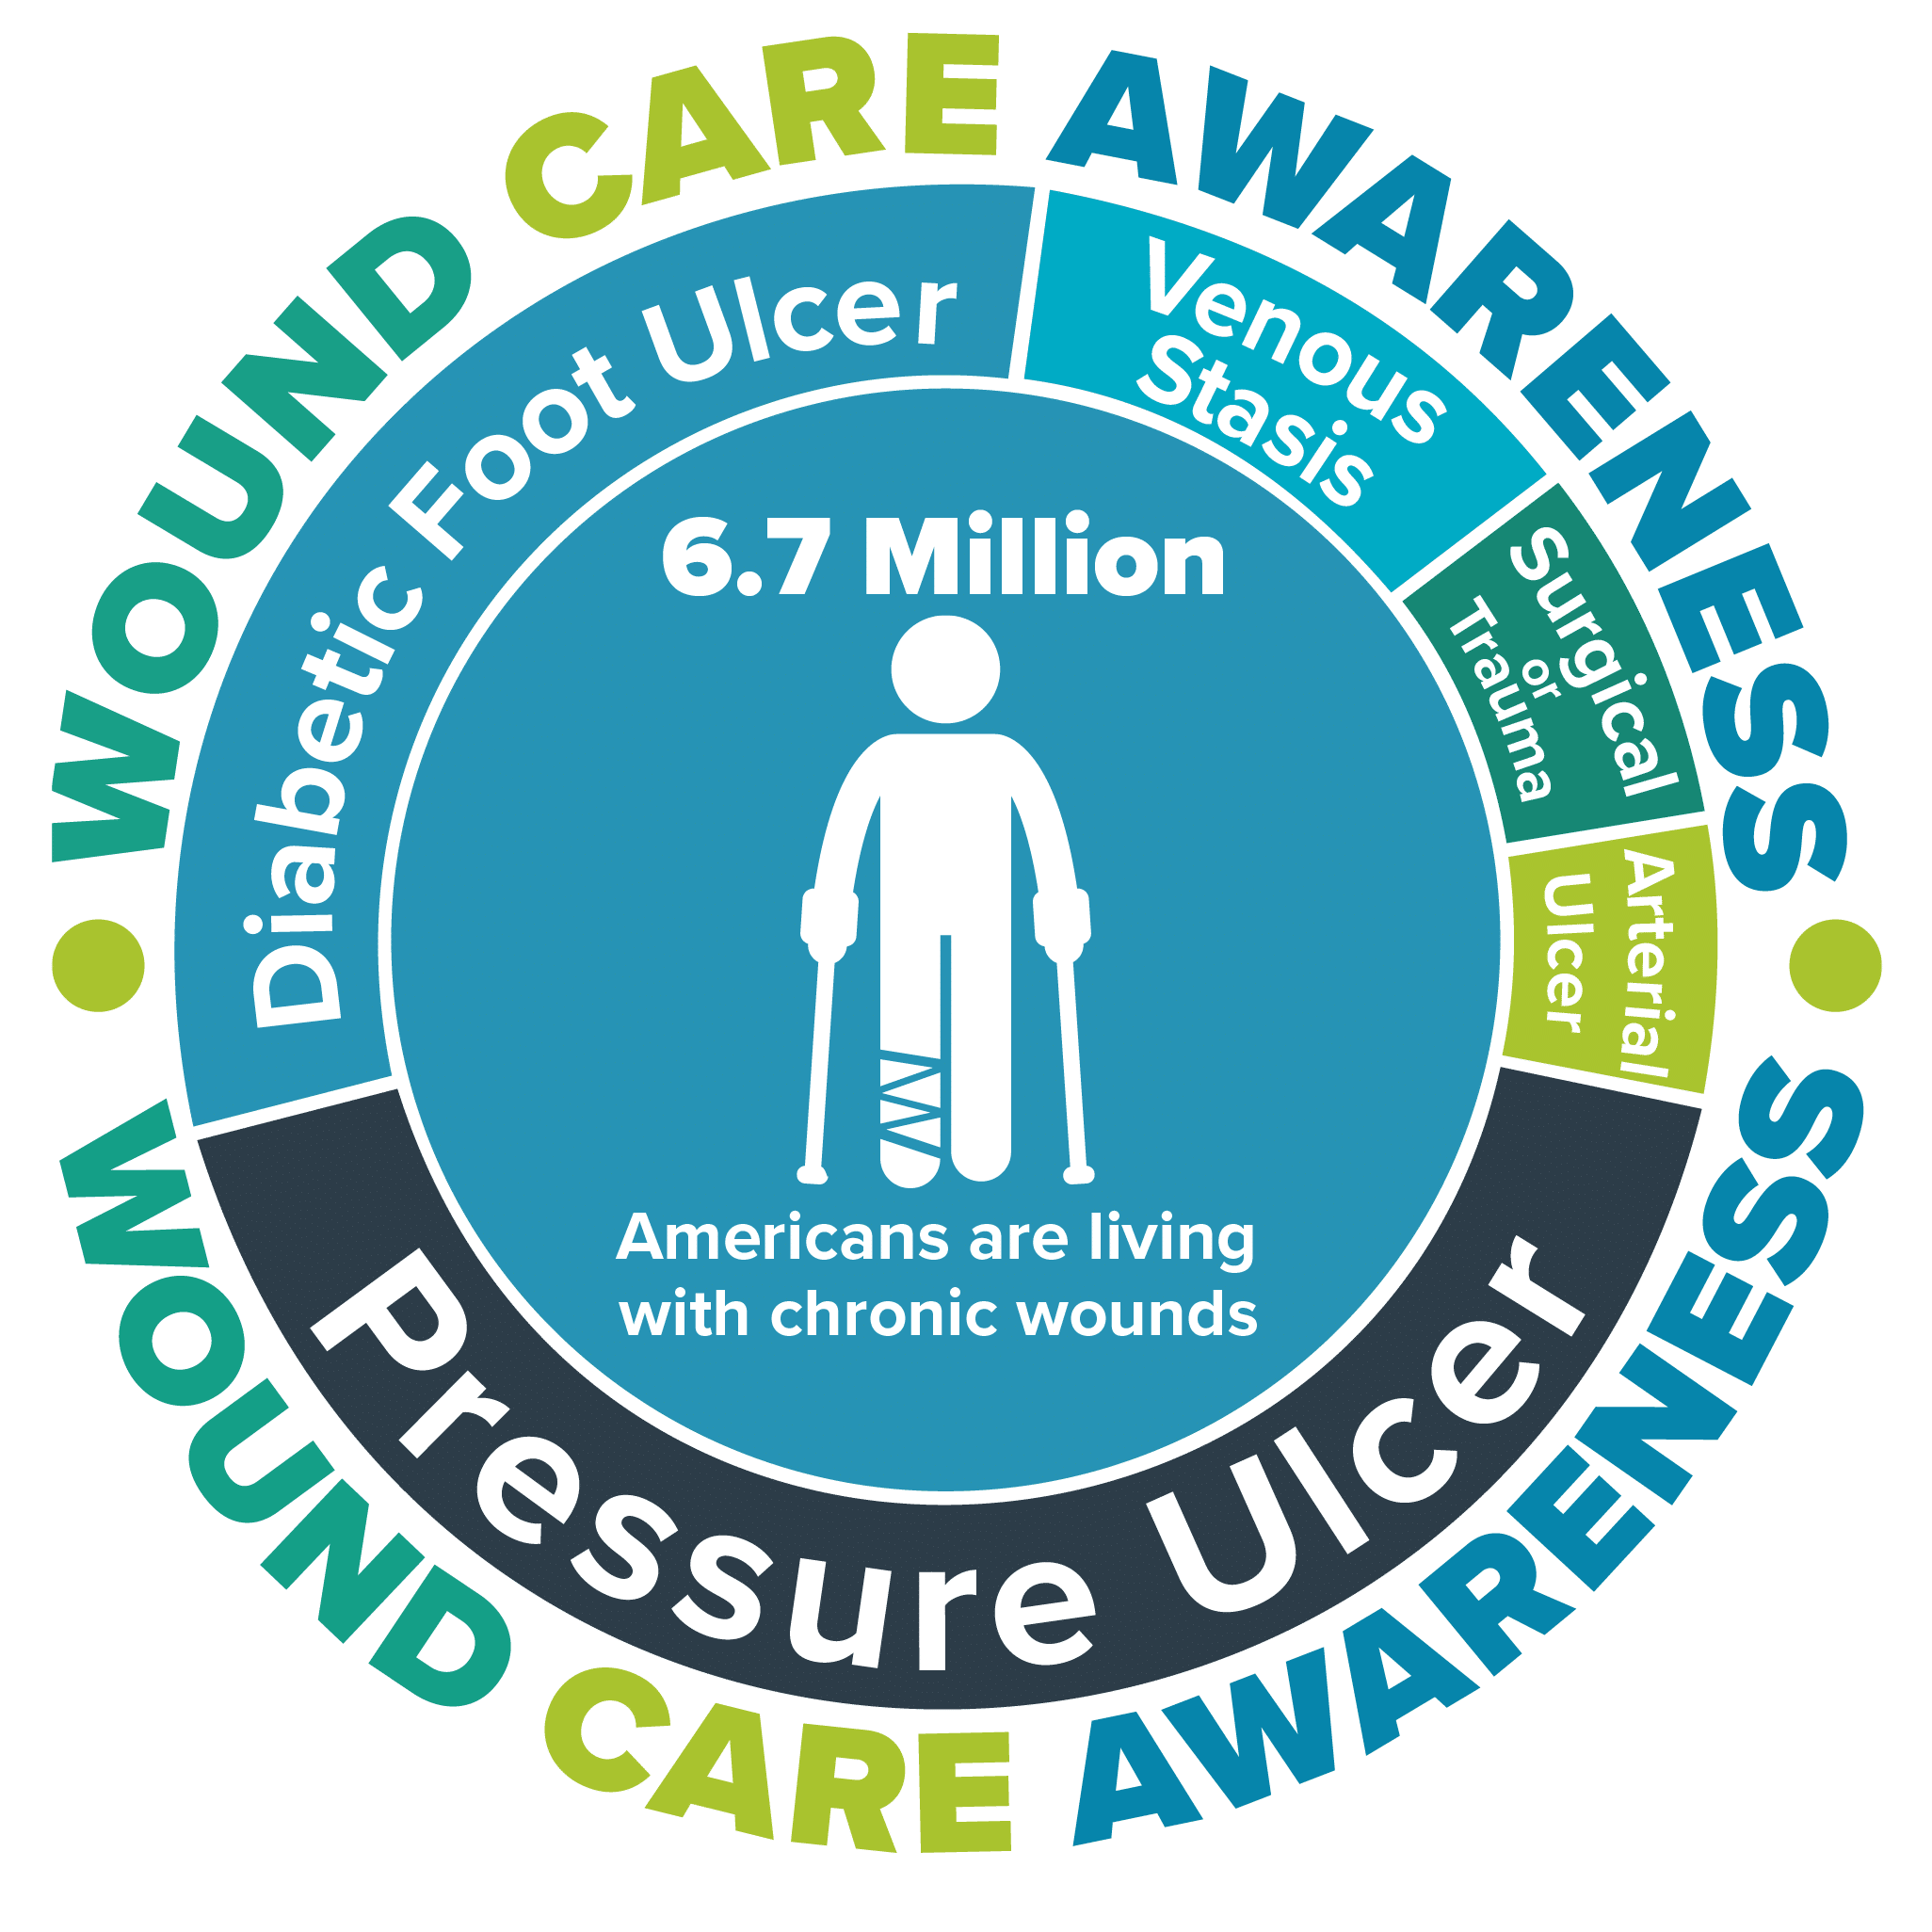 Wound Care Awareness Infographic